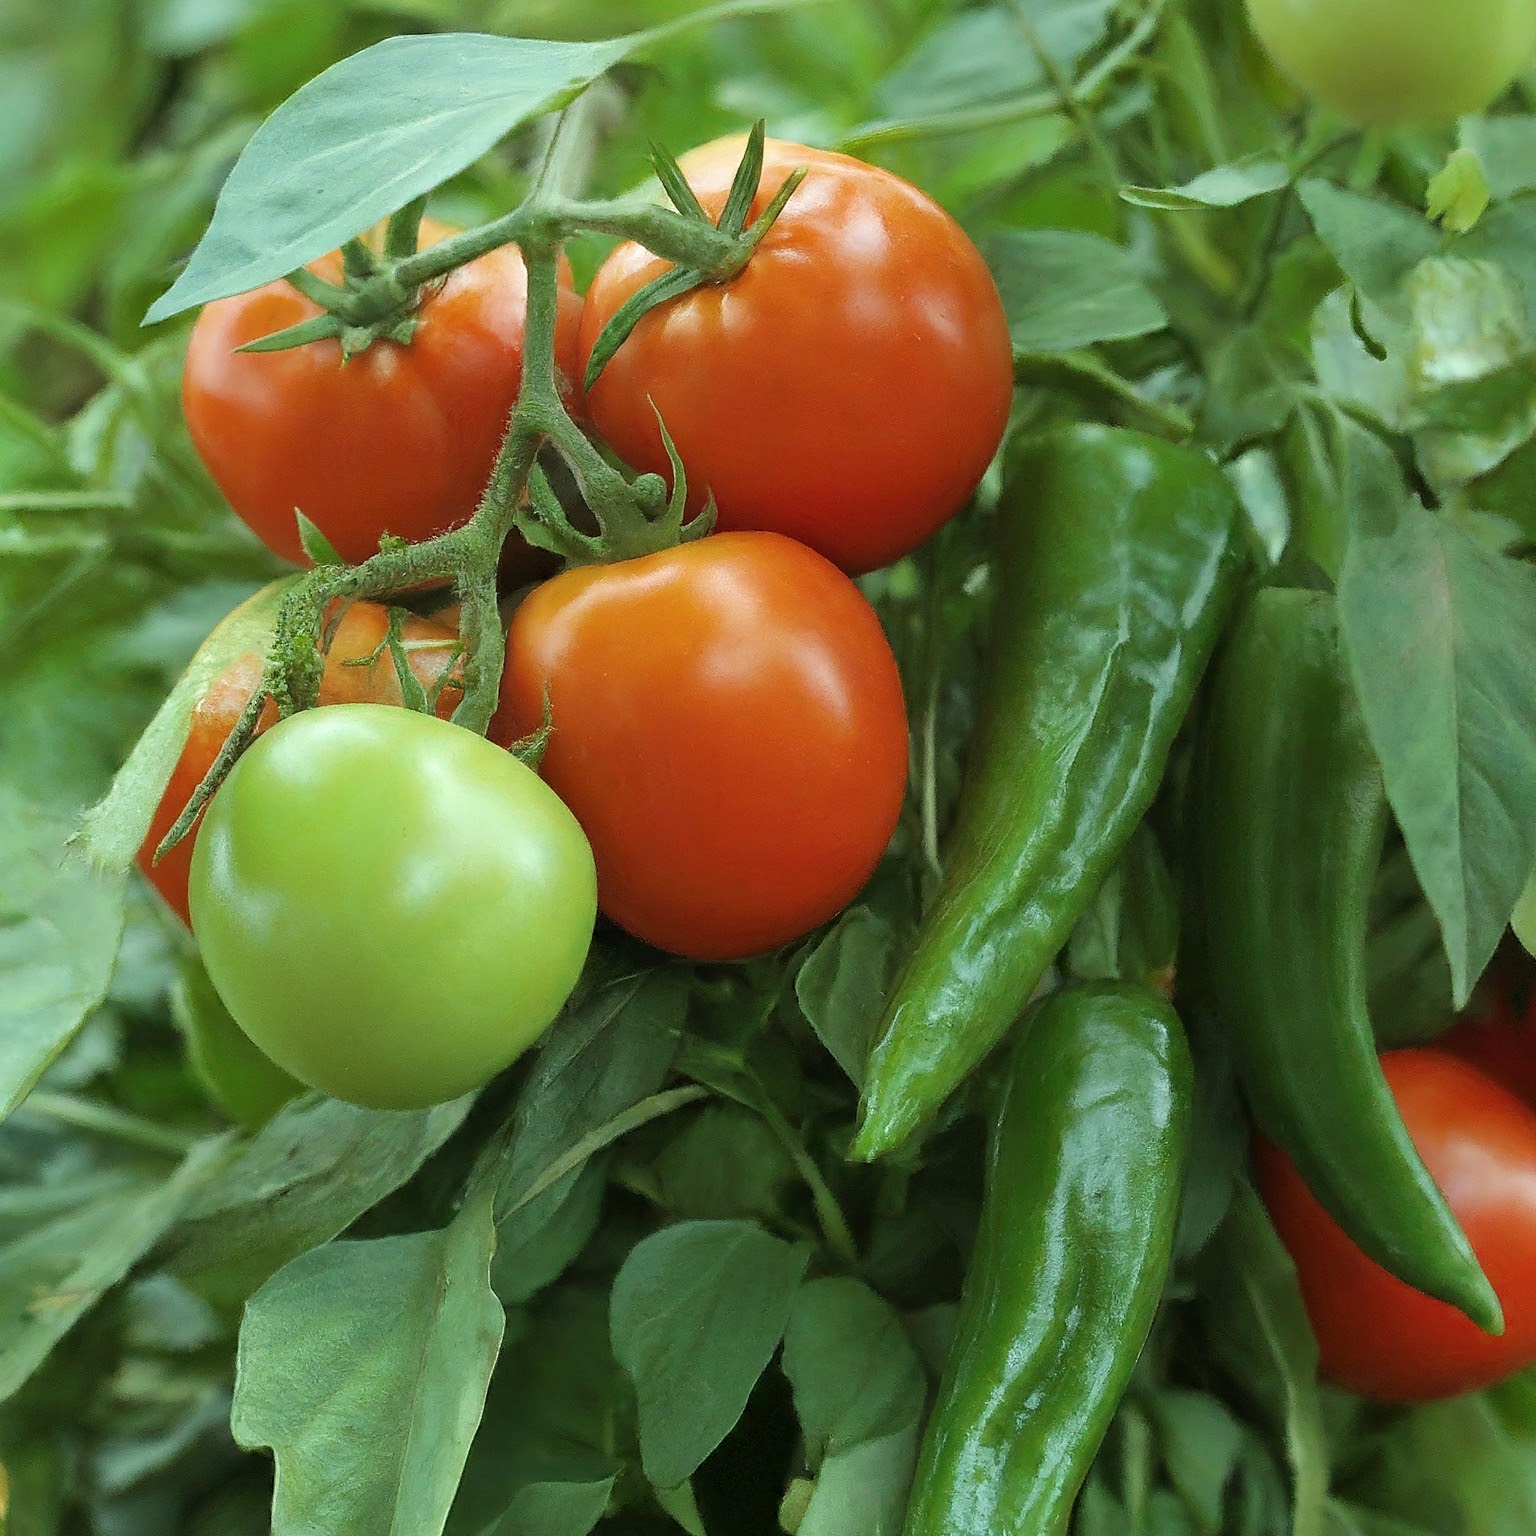 Companion Plants for Tomatoes and Peppers